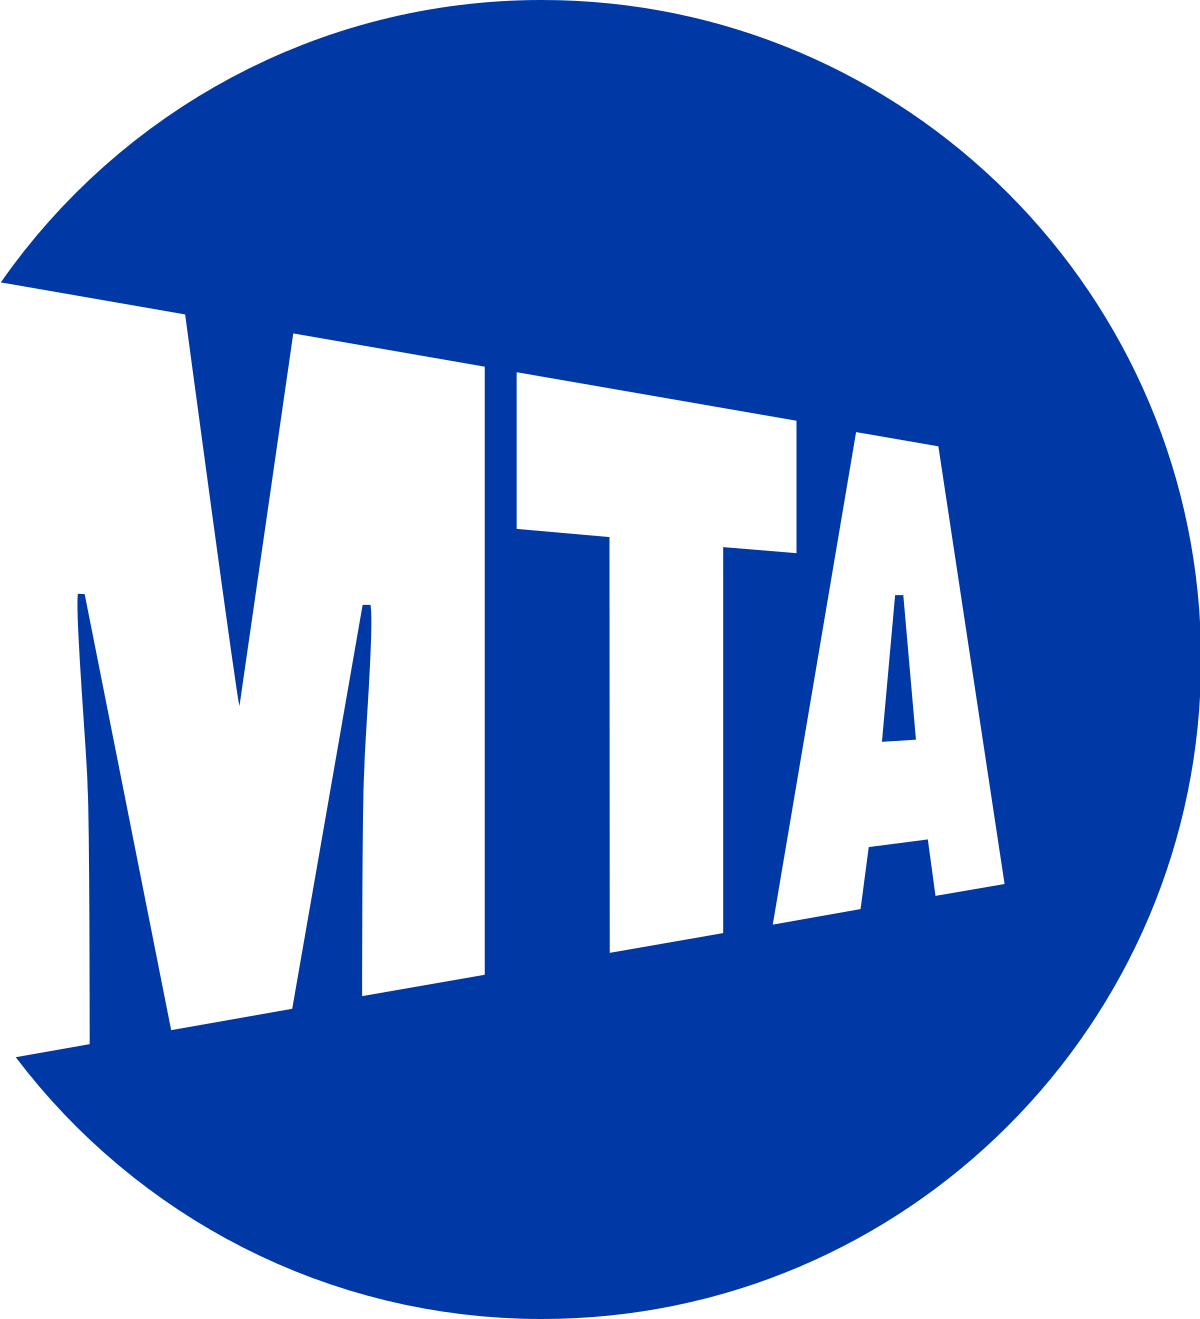 Asite Becomes Key Player in MTA's $54.8 billion Investment